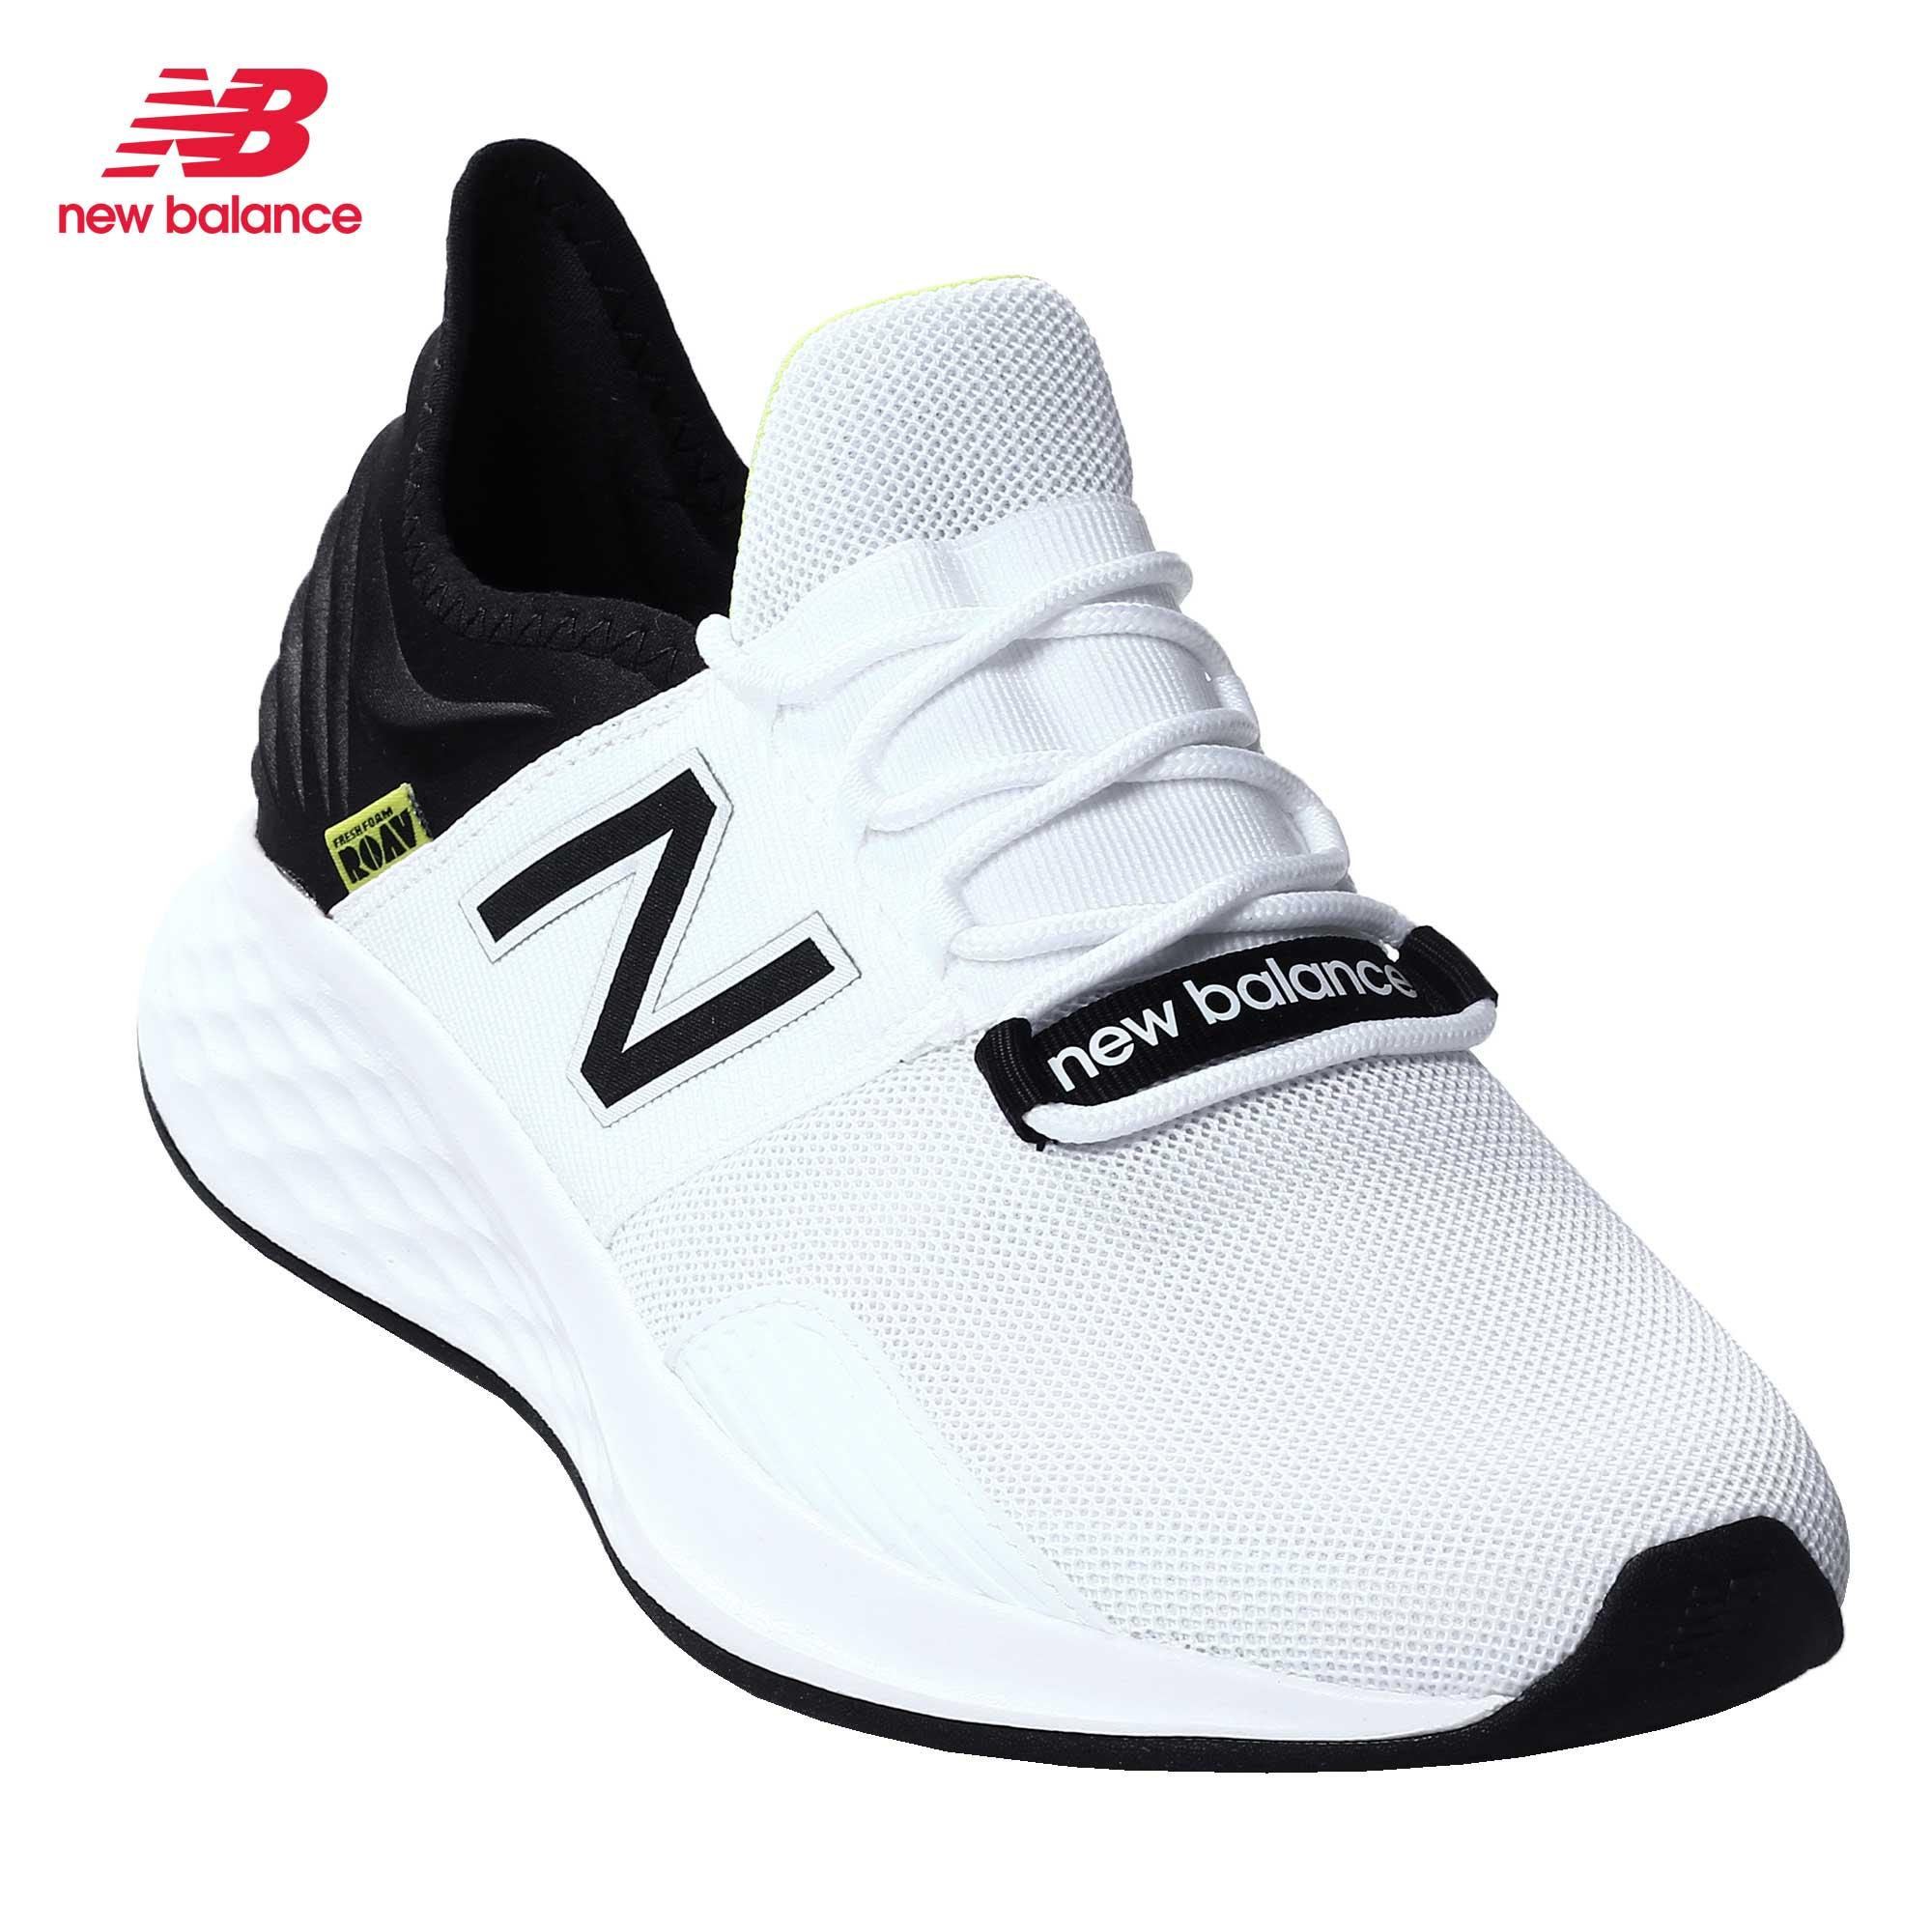 new balance shoes for men white